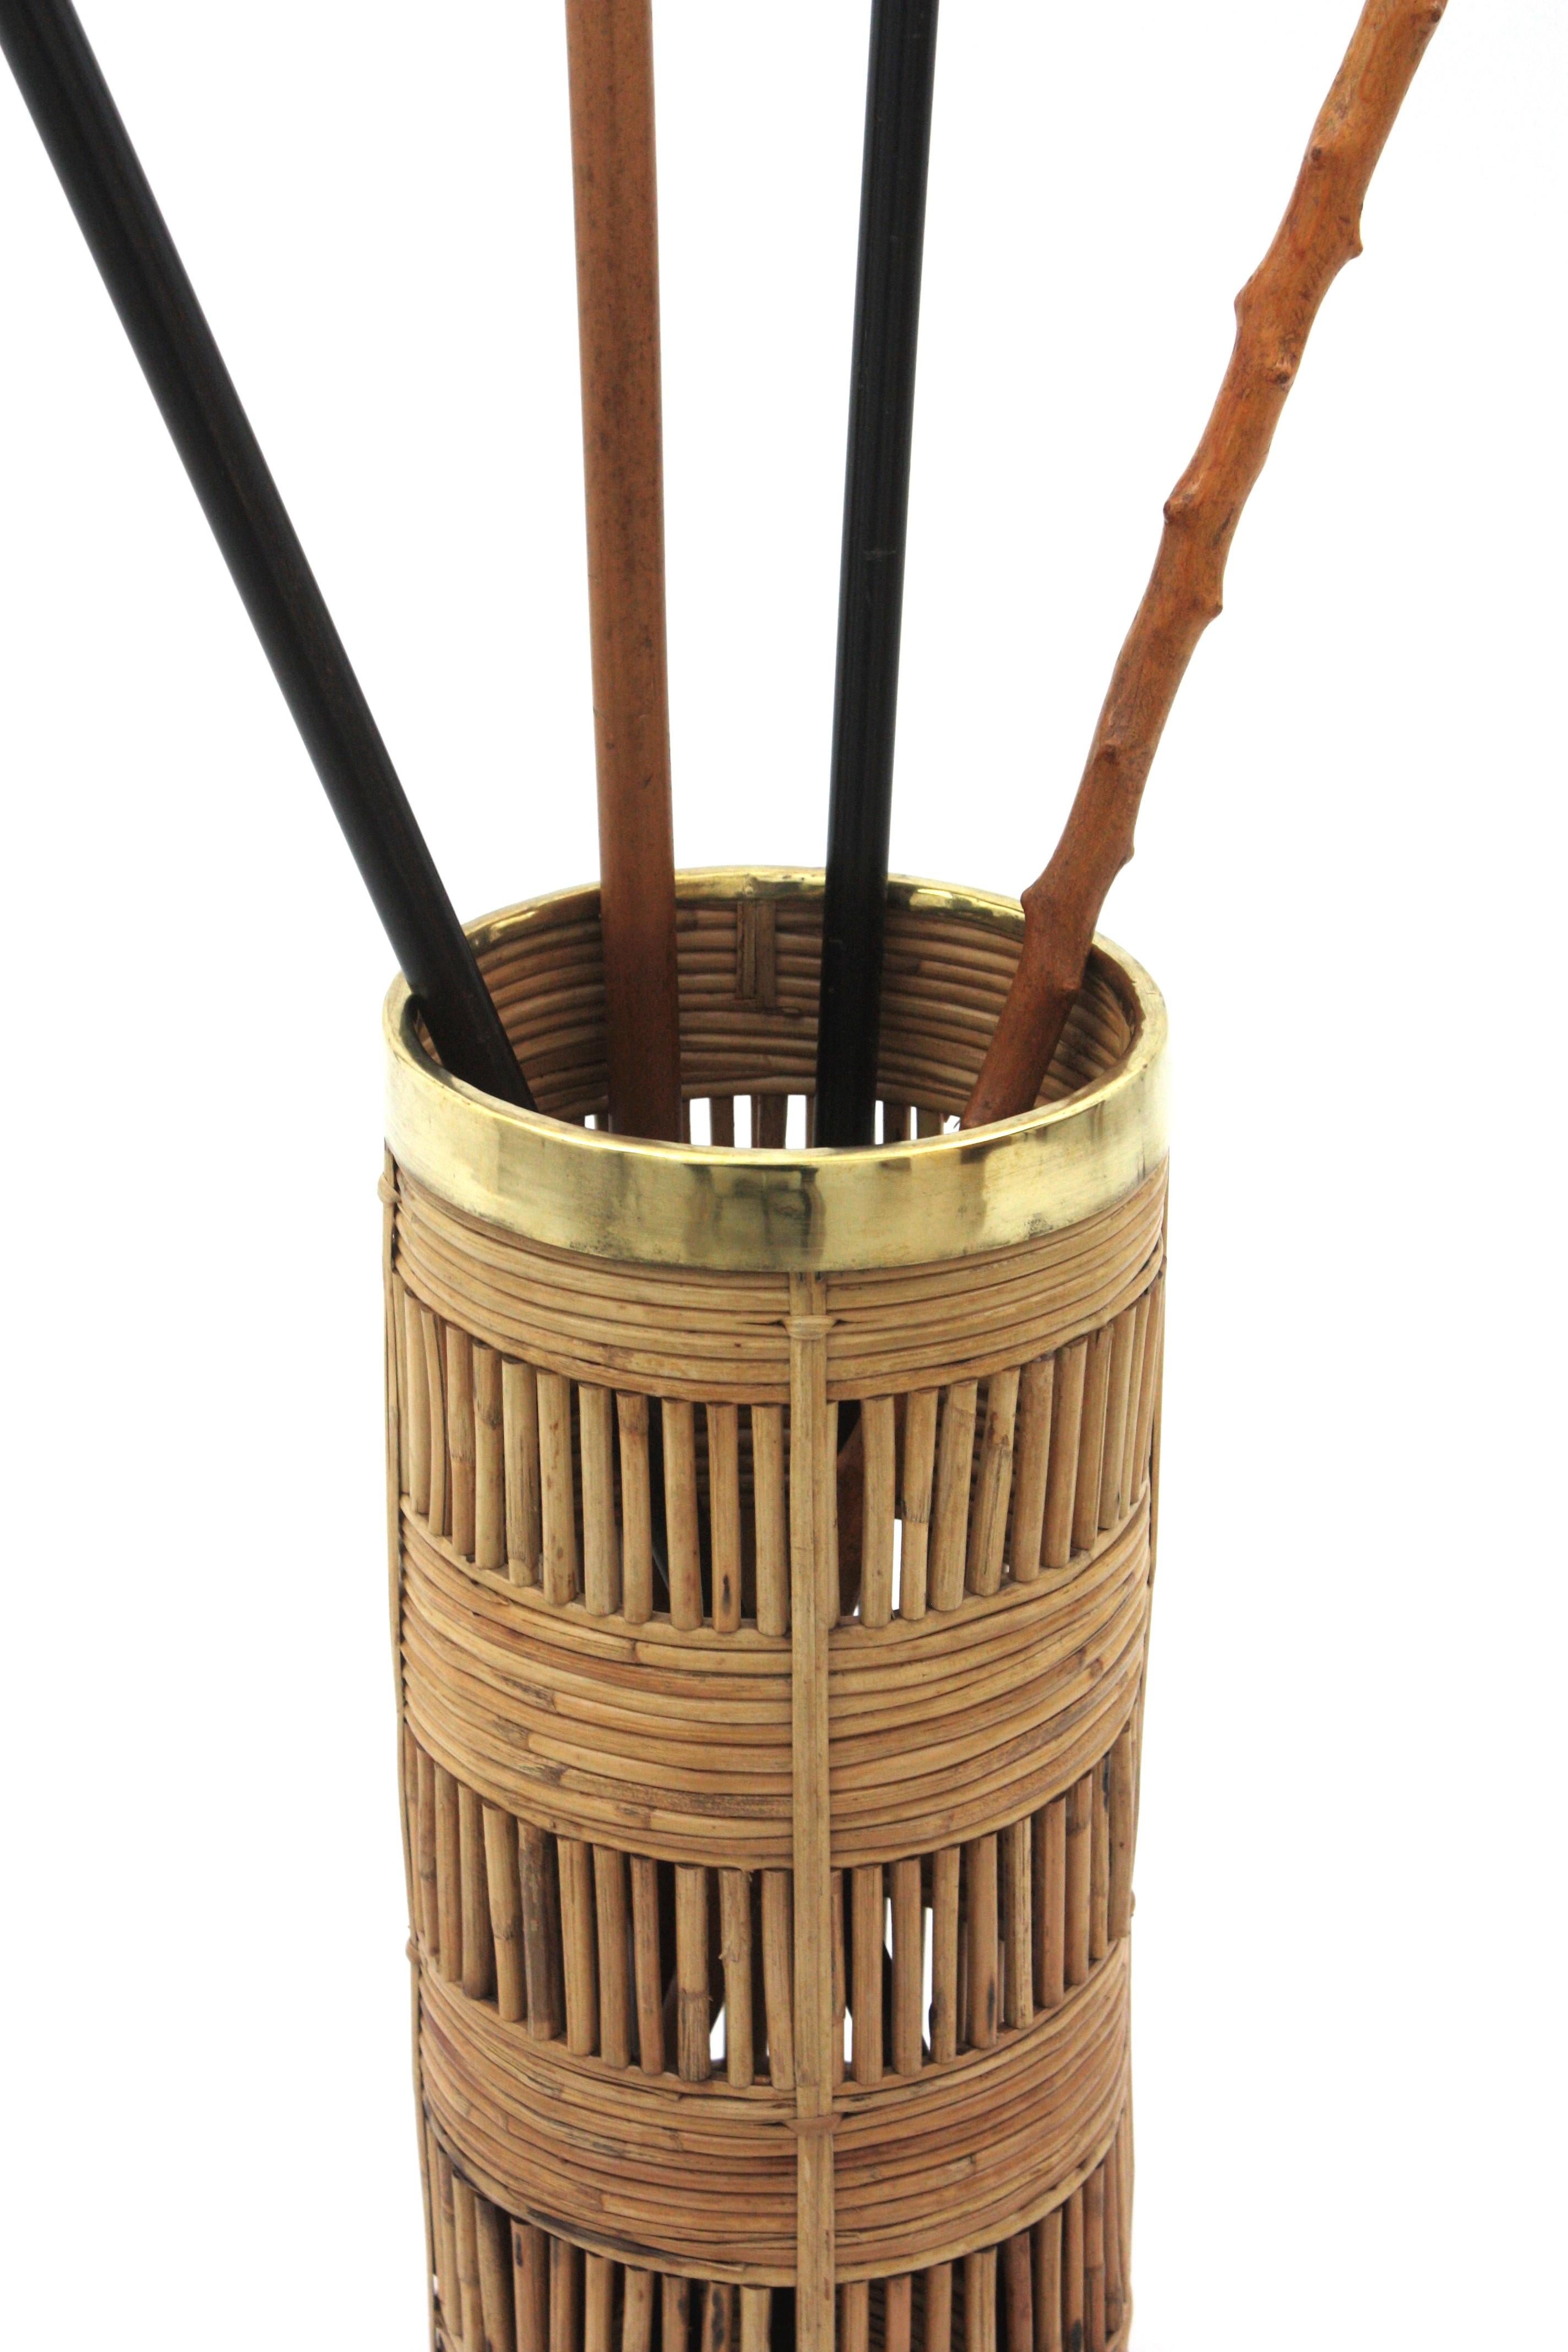 Rattan Umbrella Stand with Brass Rim, Italy, 1970s In Good Condition For Sale In Barcelona, ES